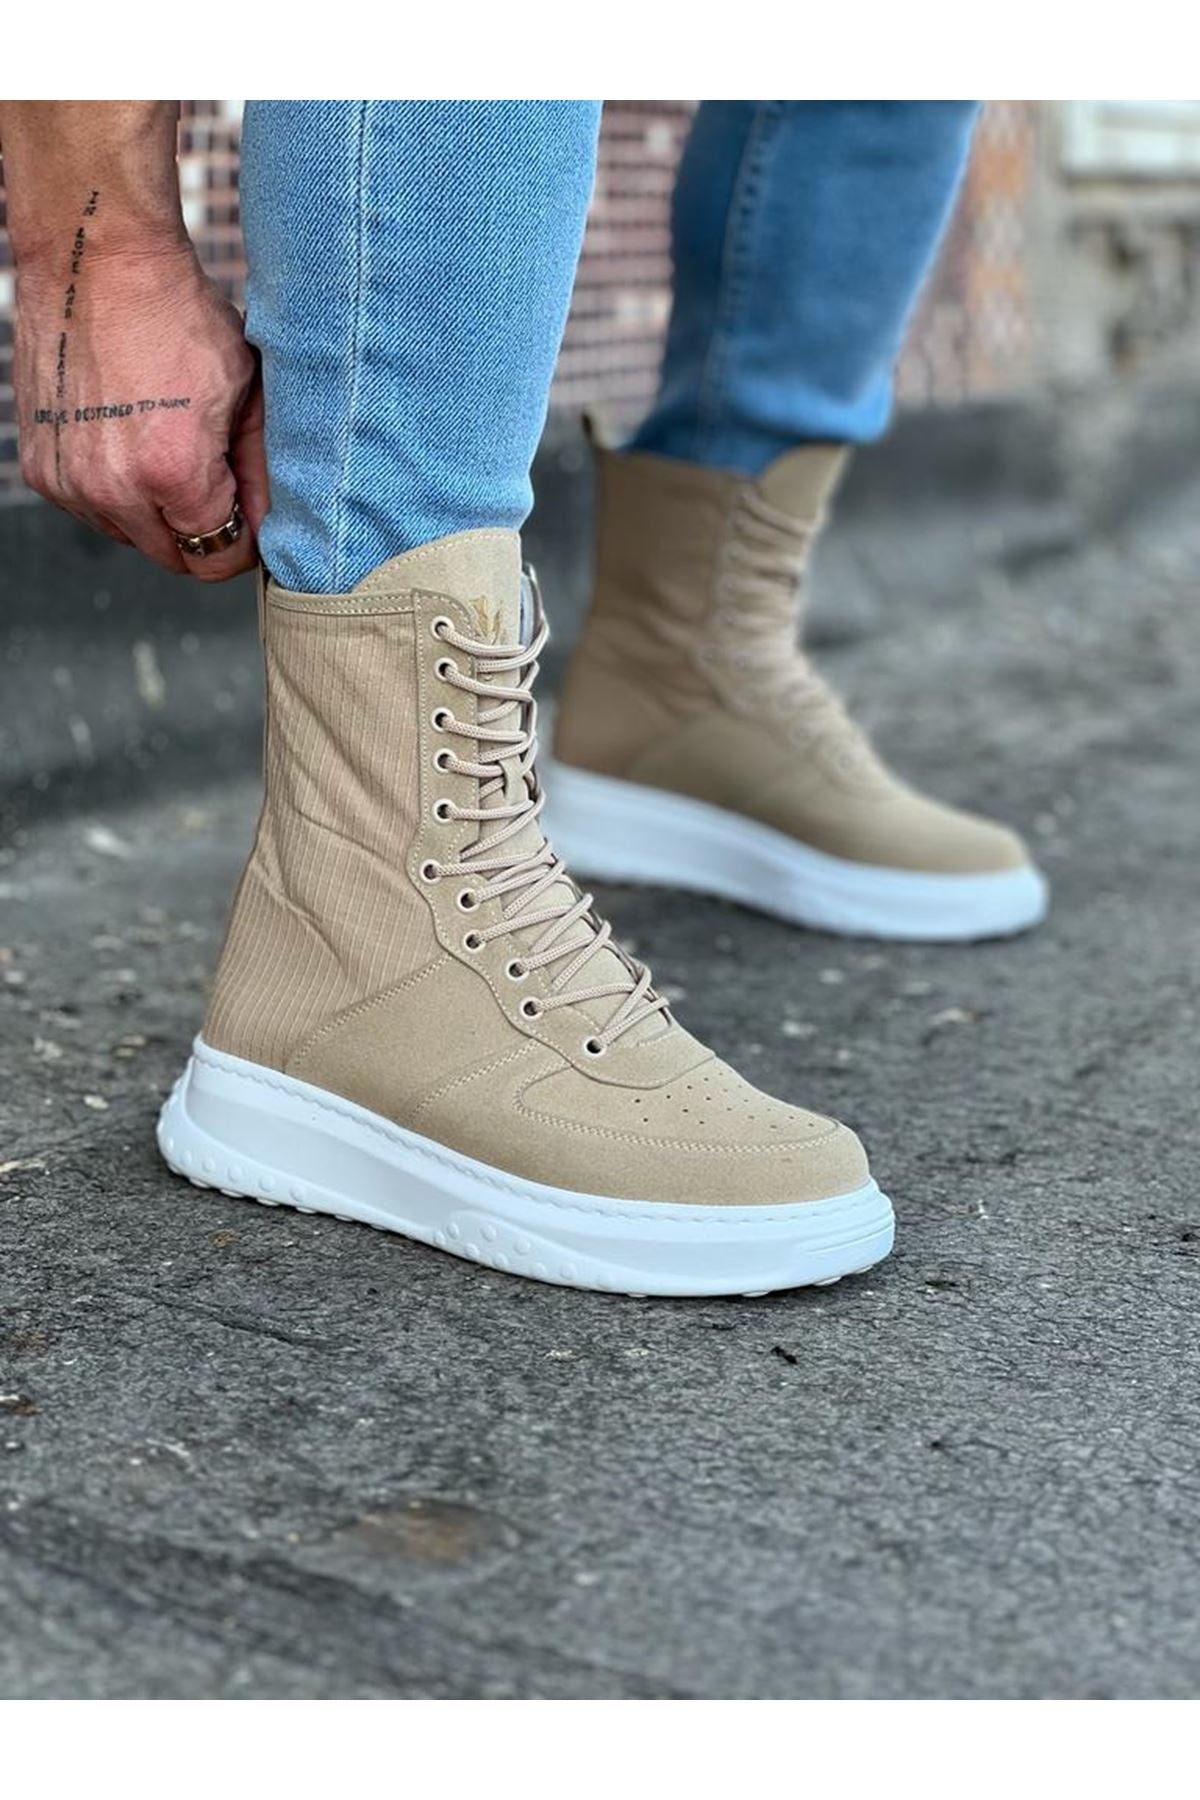 WG012 Men's Beige Suede Leather Long Lace-Up Boots - STREETMODE ™